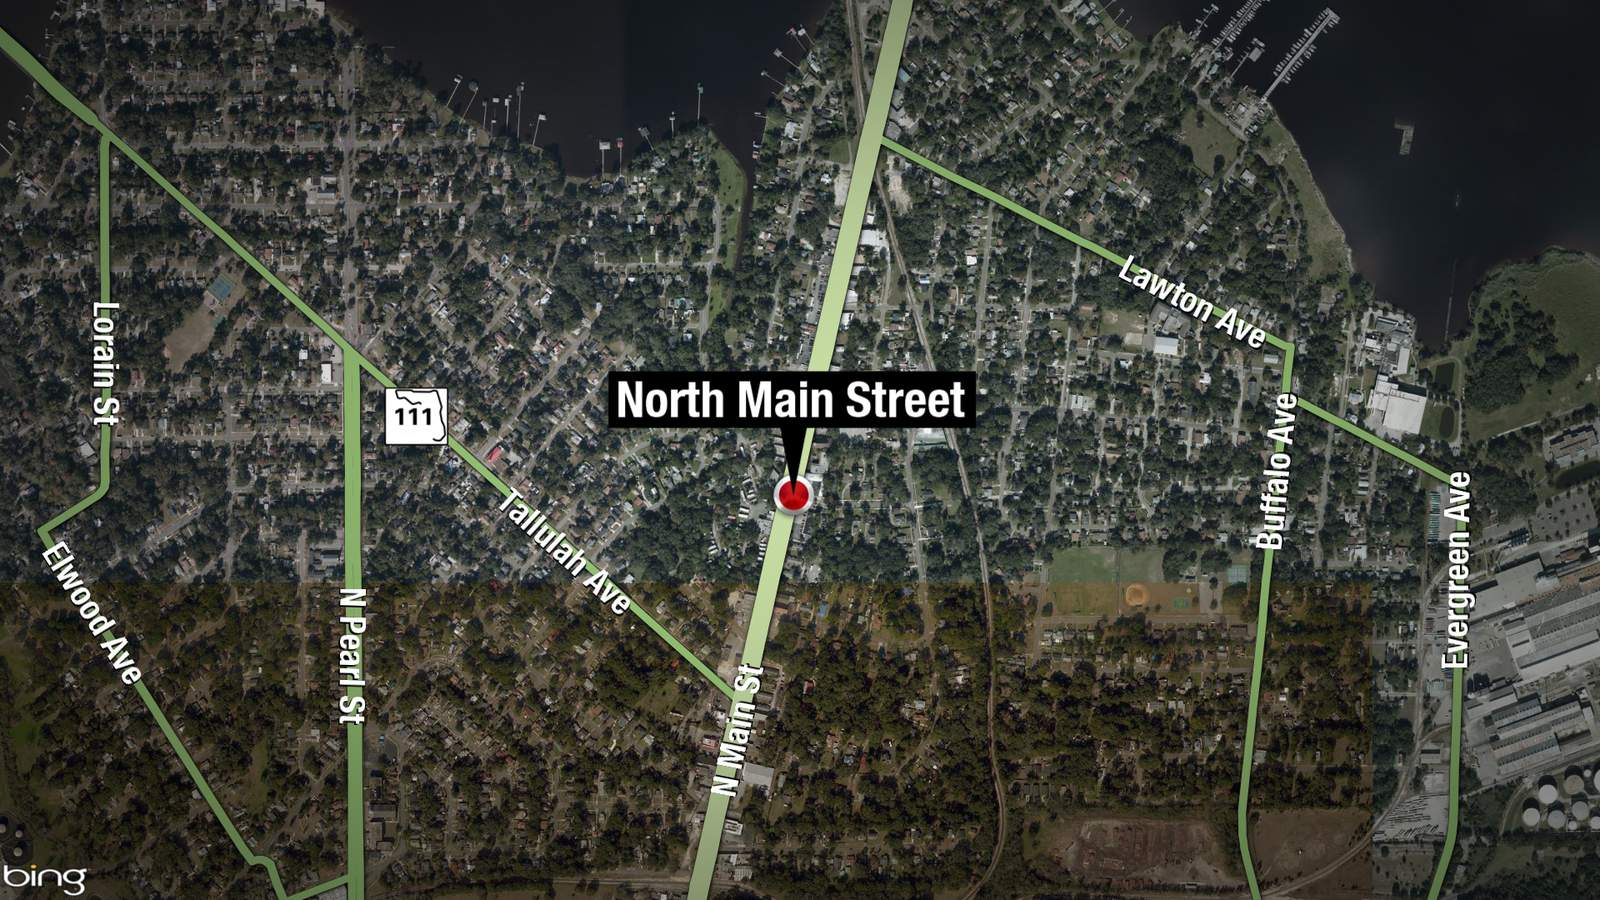 Jacksonville police investigate hit-and-run on North Main Street